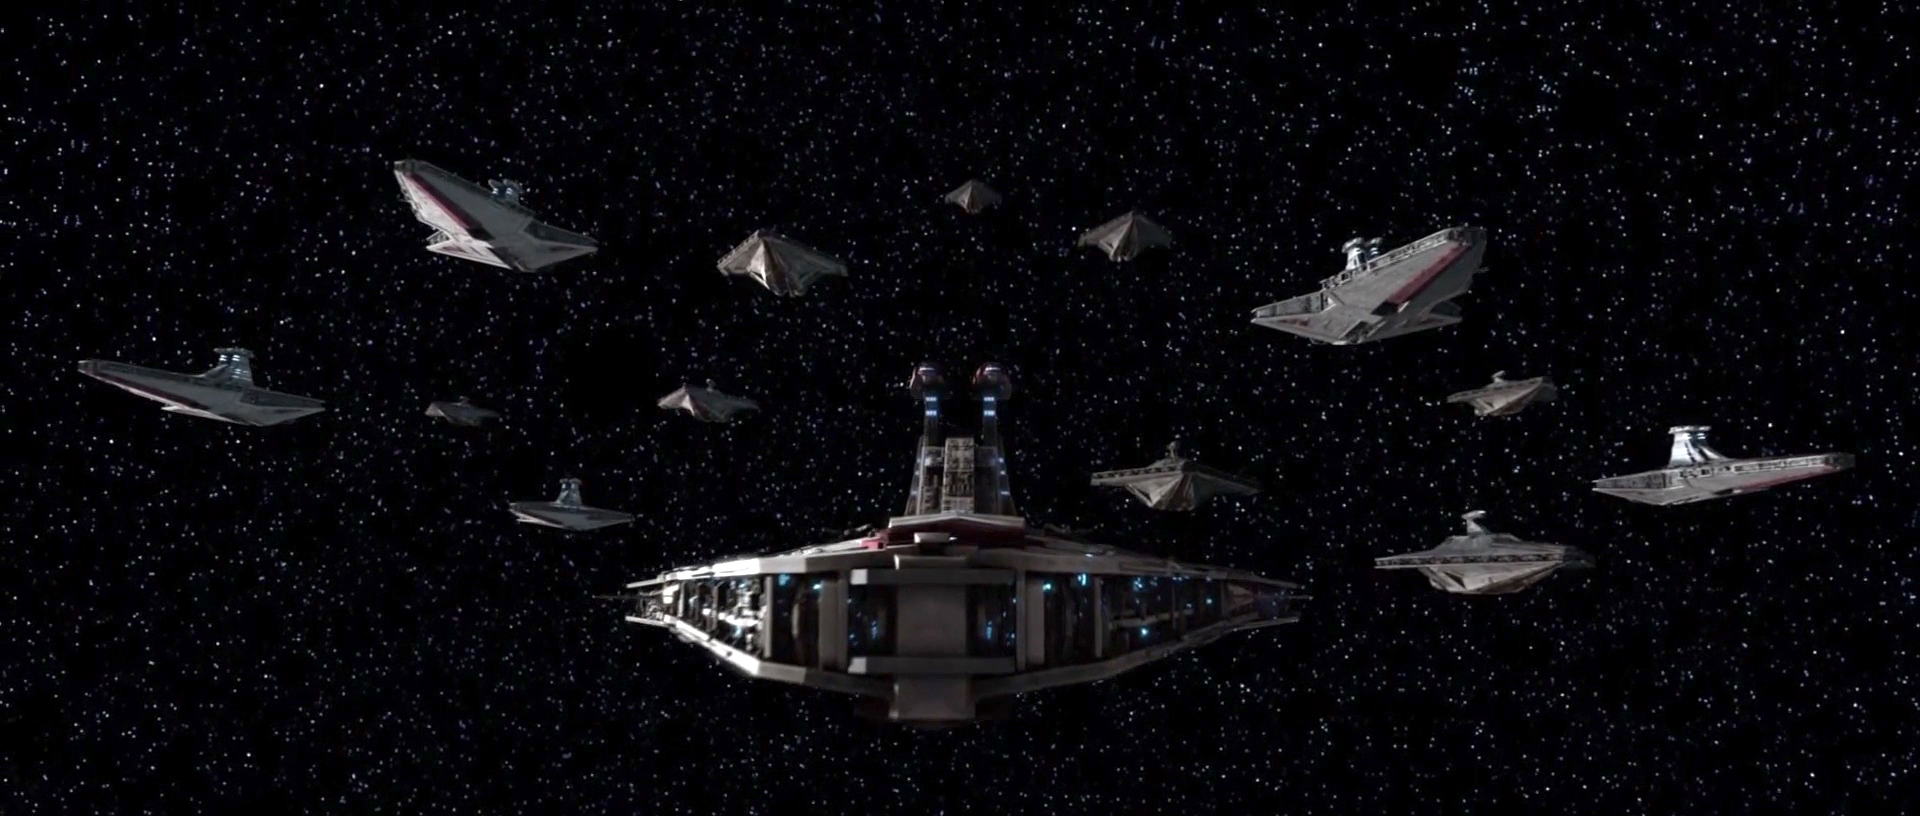 star wars who did the republic navy defend?